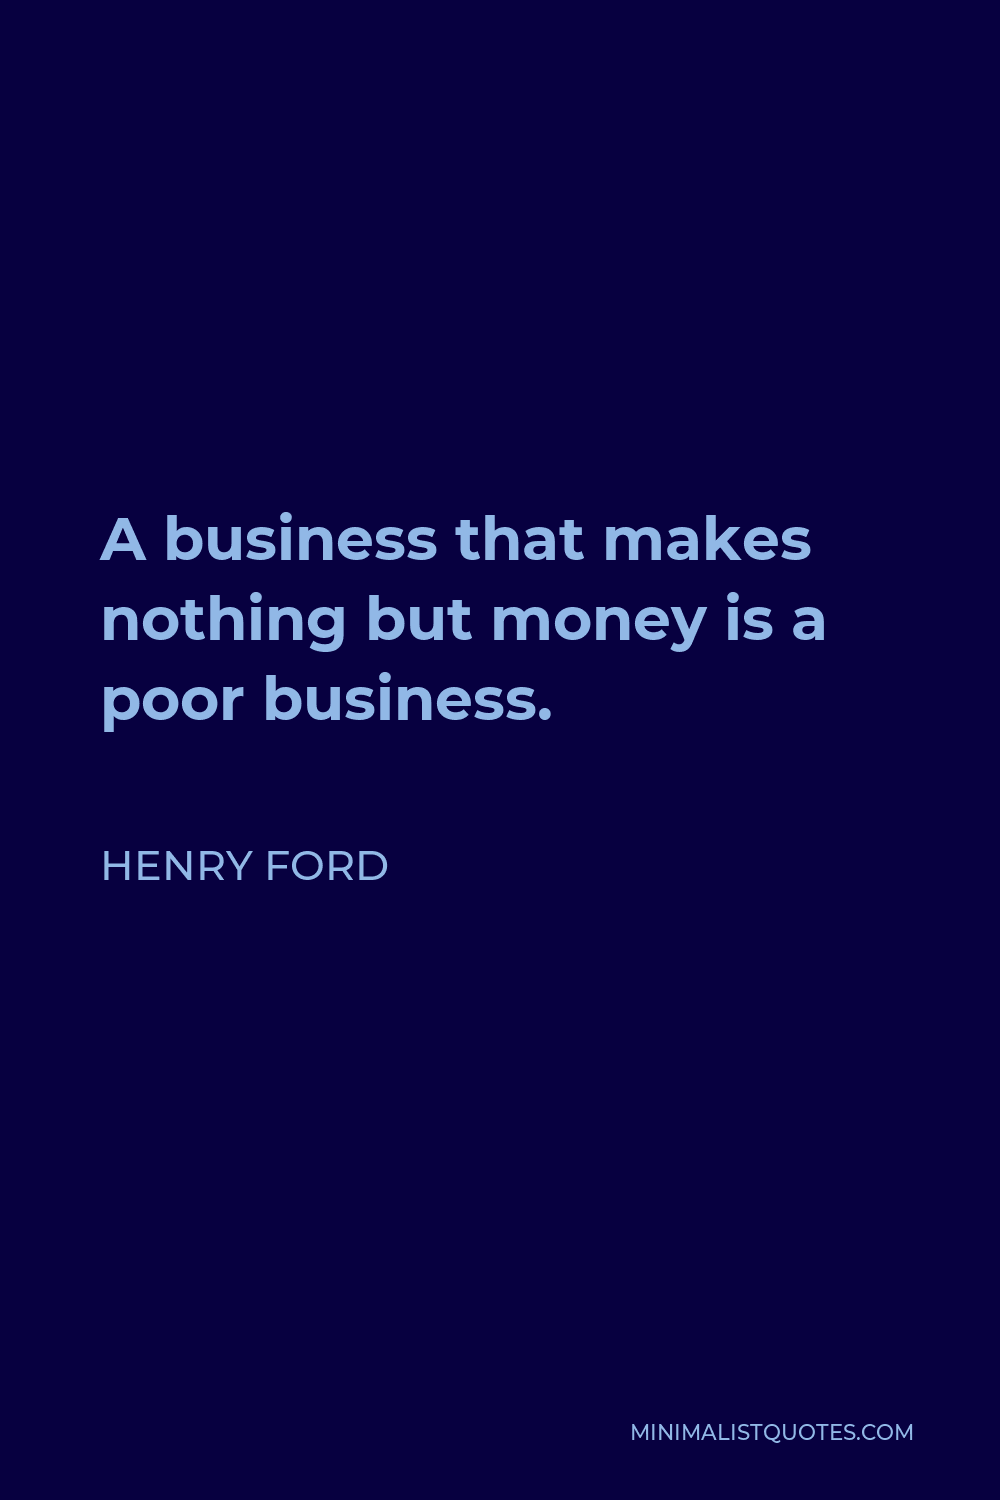 Henry Ford Quote - A business that makes nothing but money is a poor business.